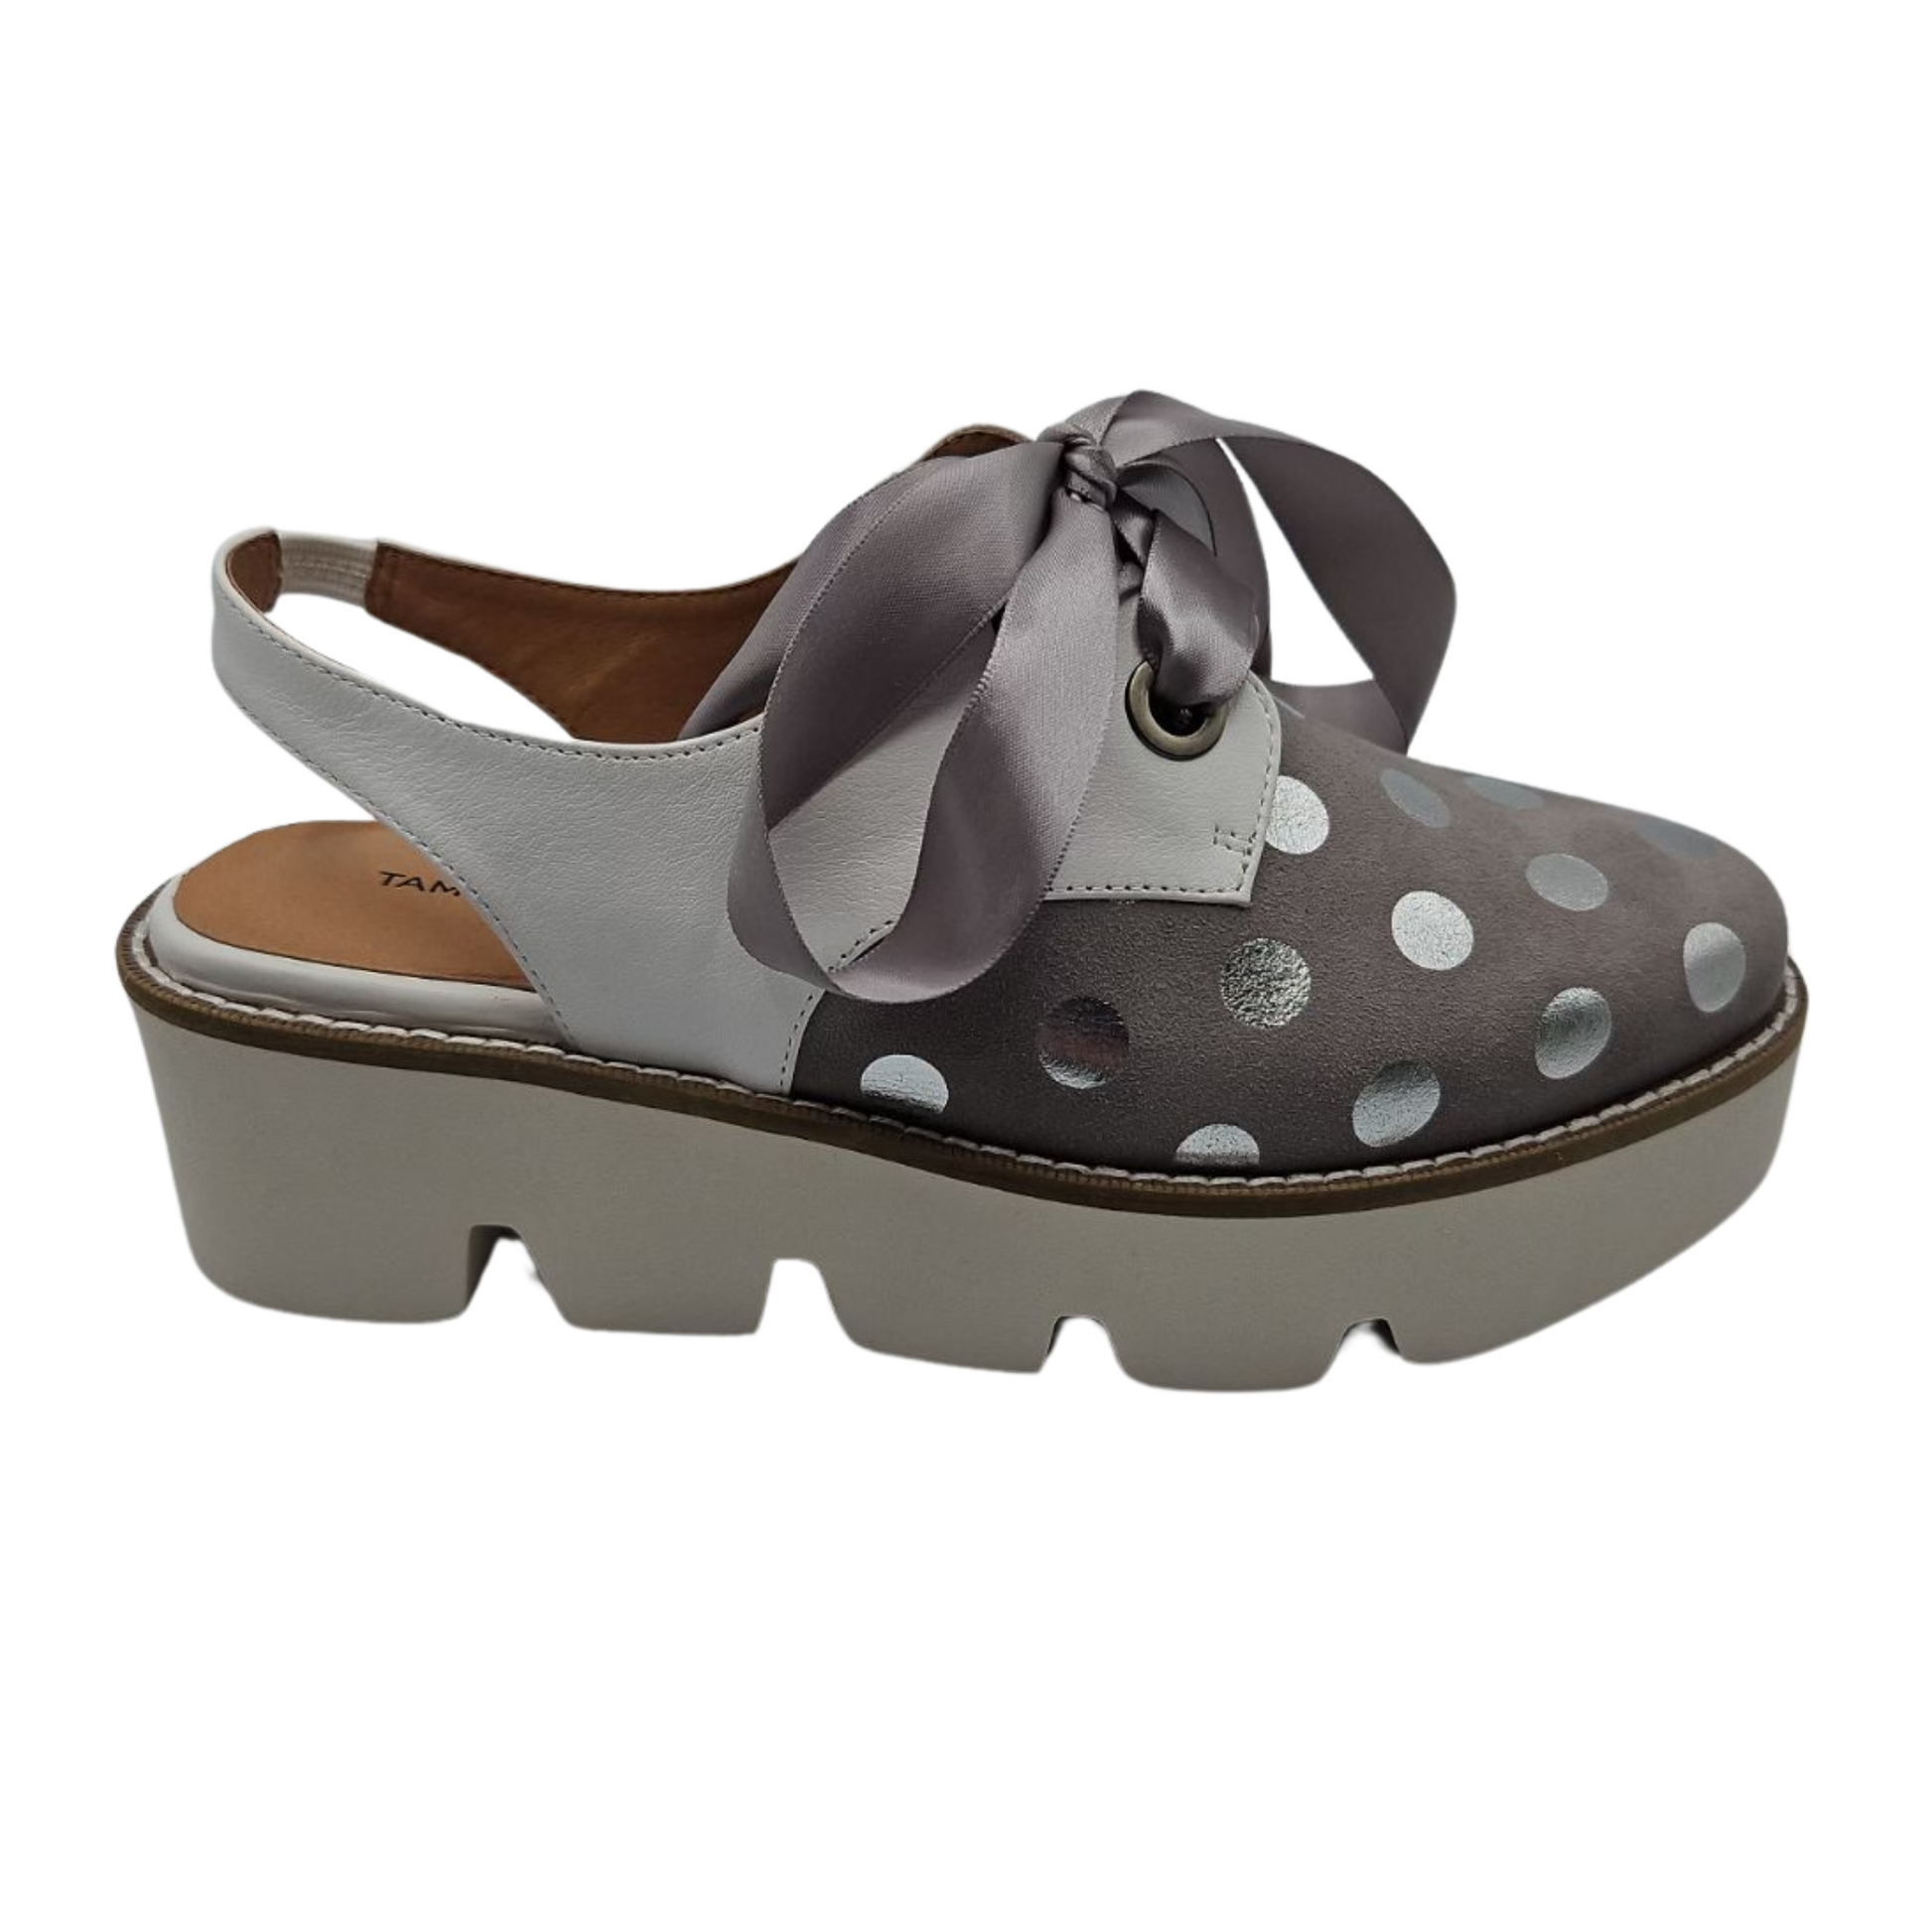 Right facing view of dove grey suede oxfords with shiny silver polka dots. Featuring satin ribbon laces, slingback strap and chunky white platform sole.